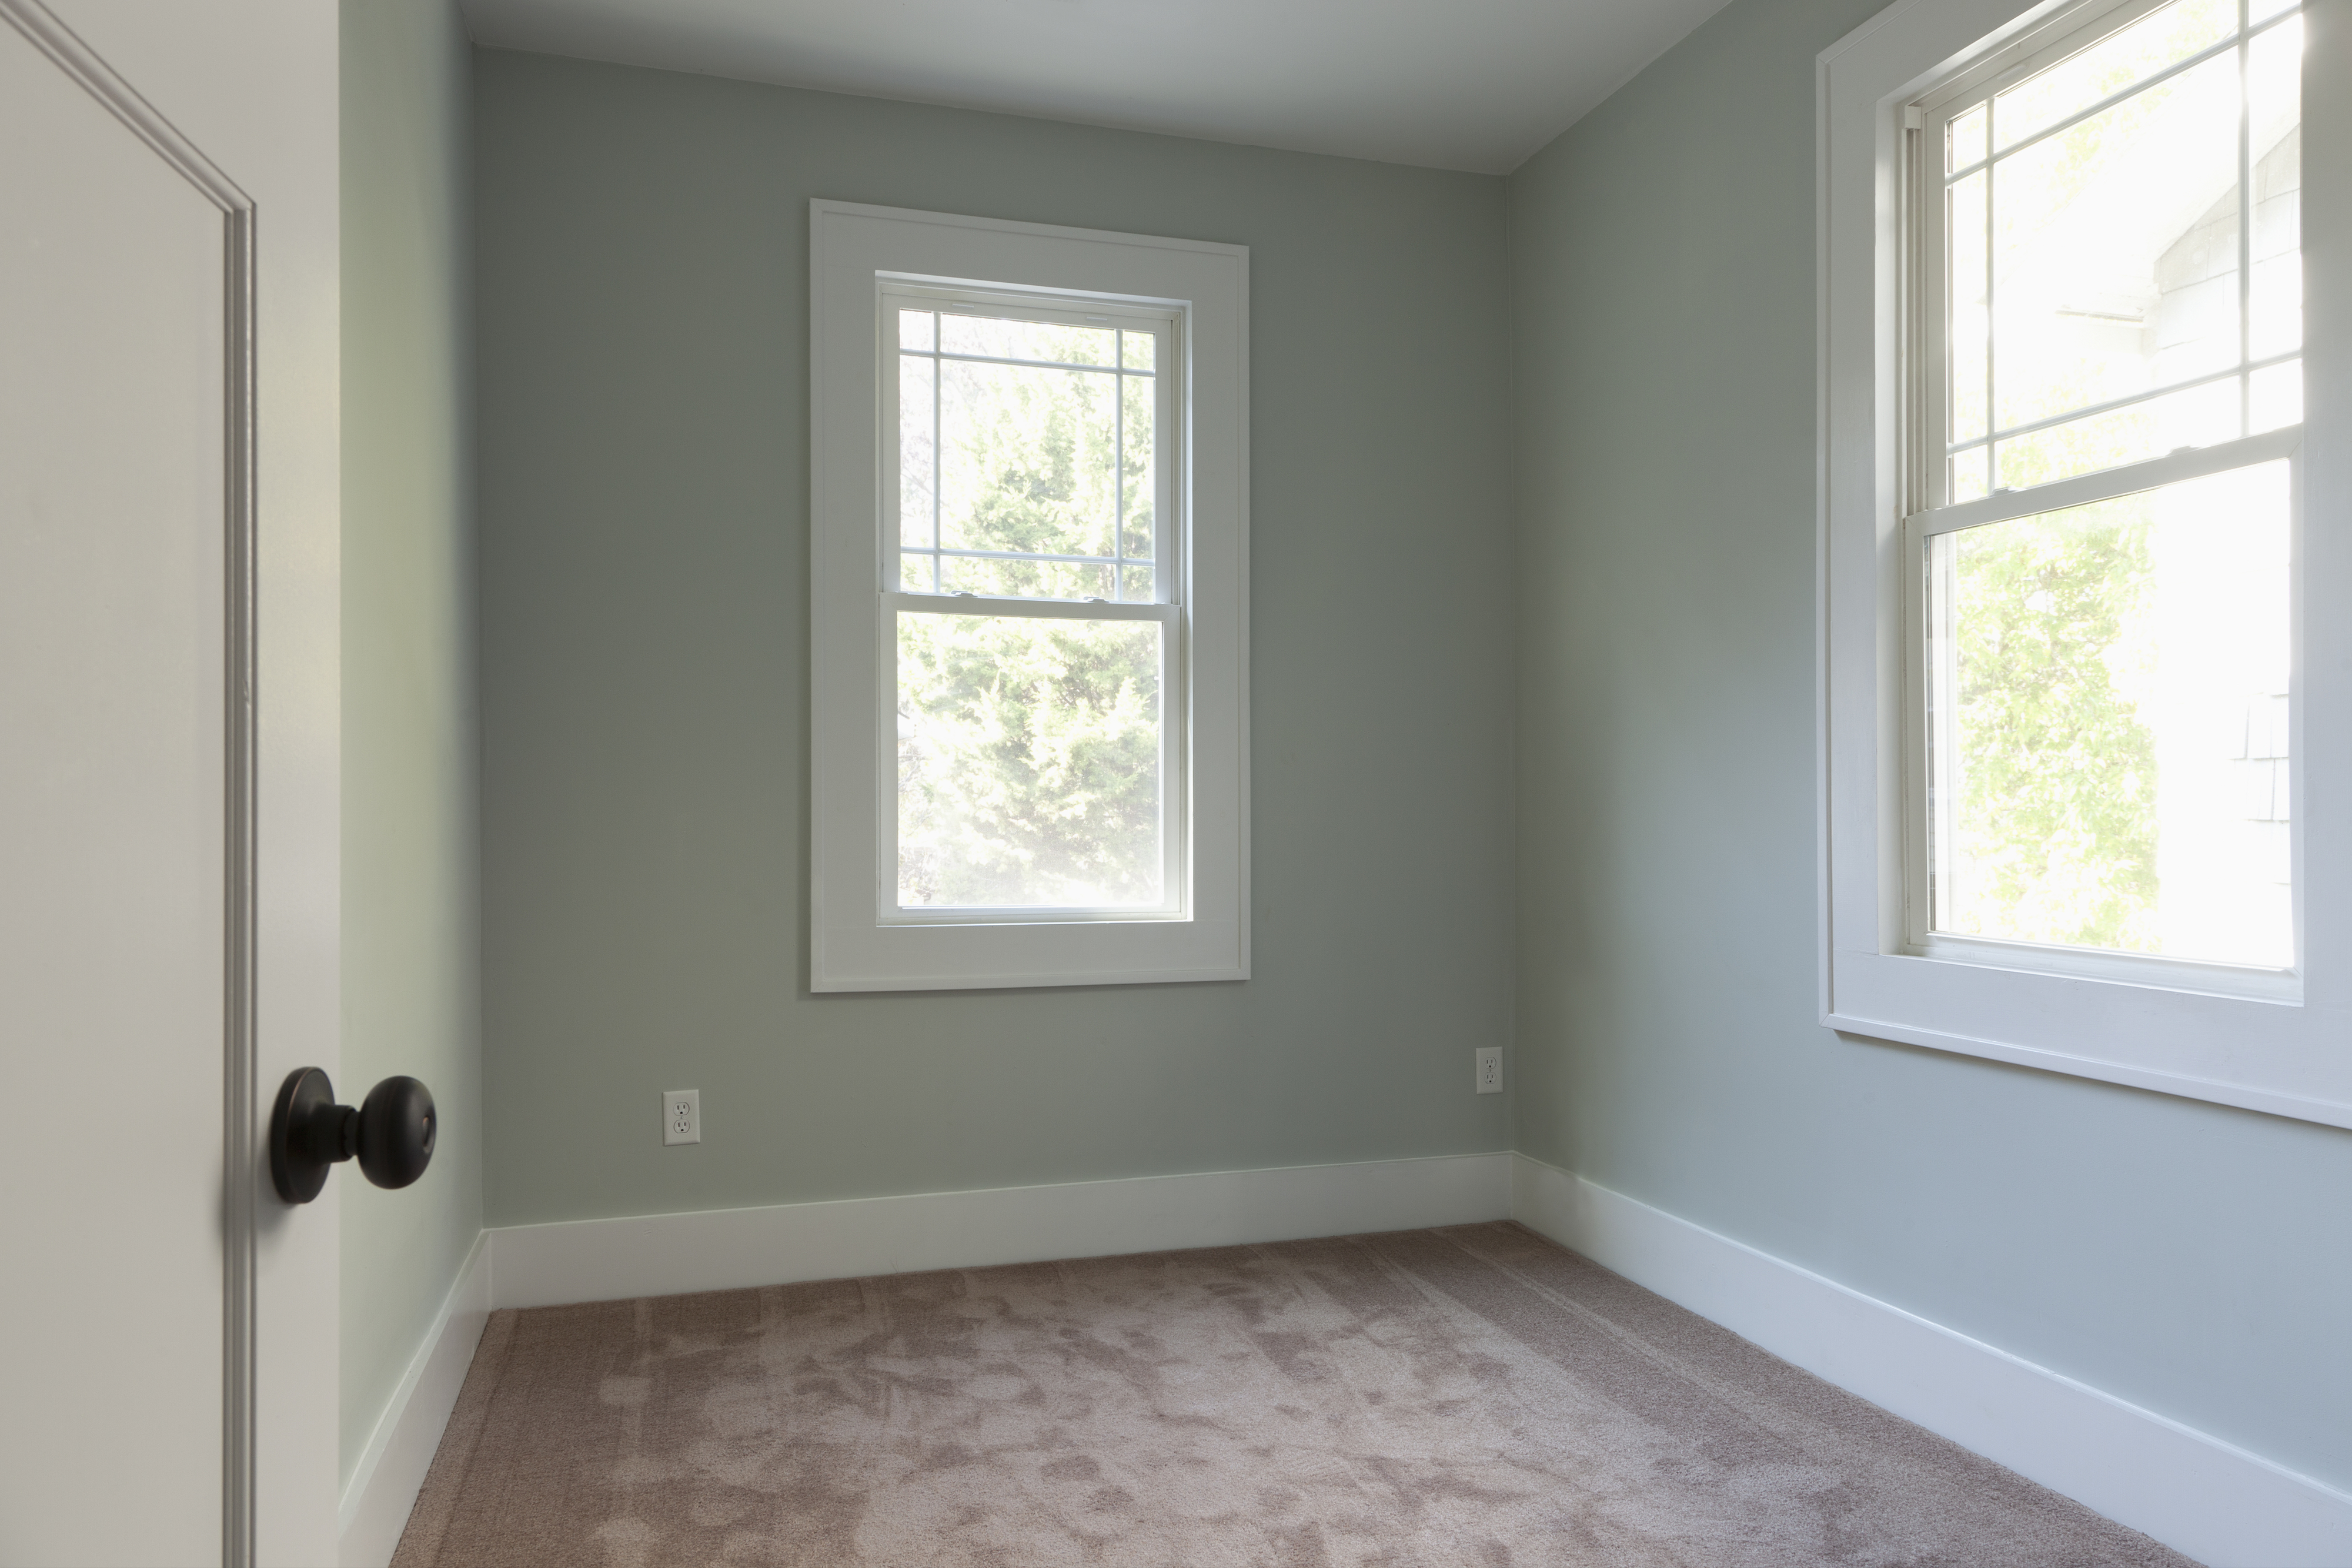 Small, empty room with a closed door on the left, two windows, and carpeted floor